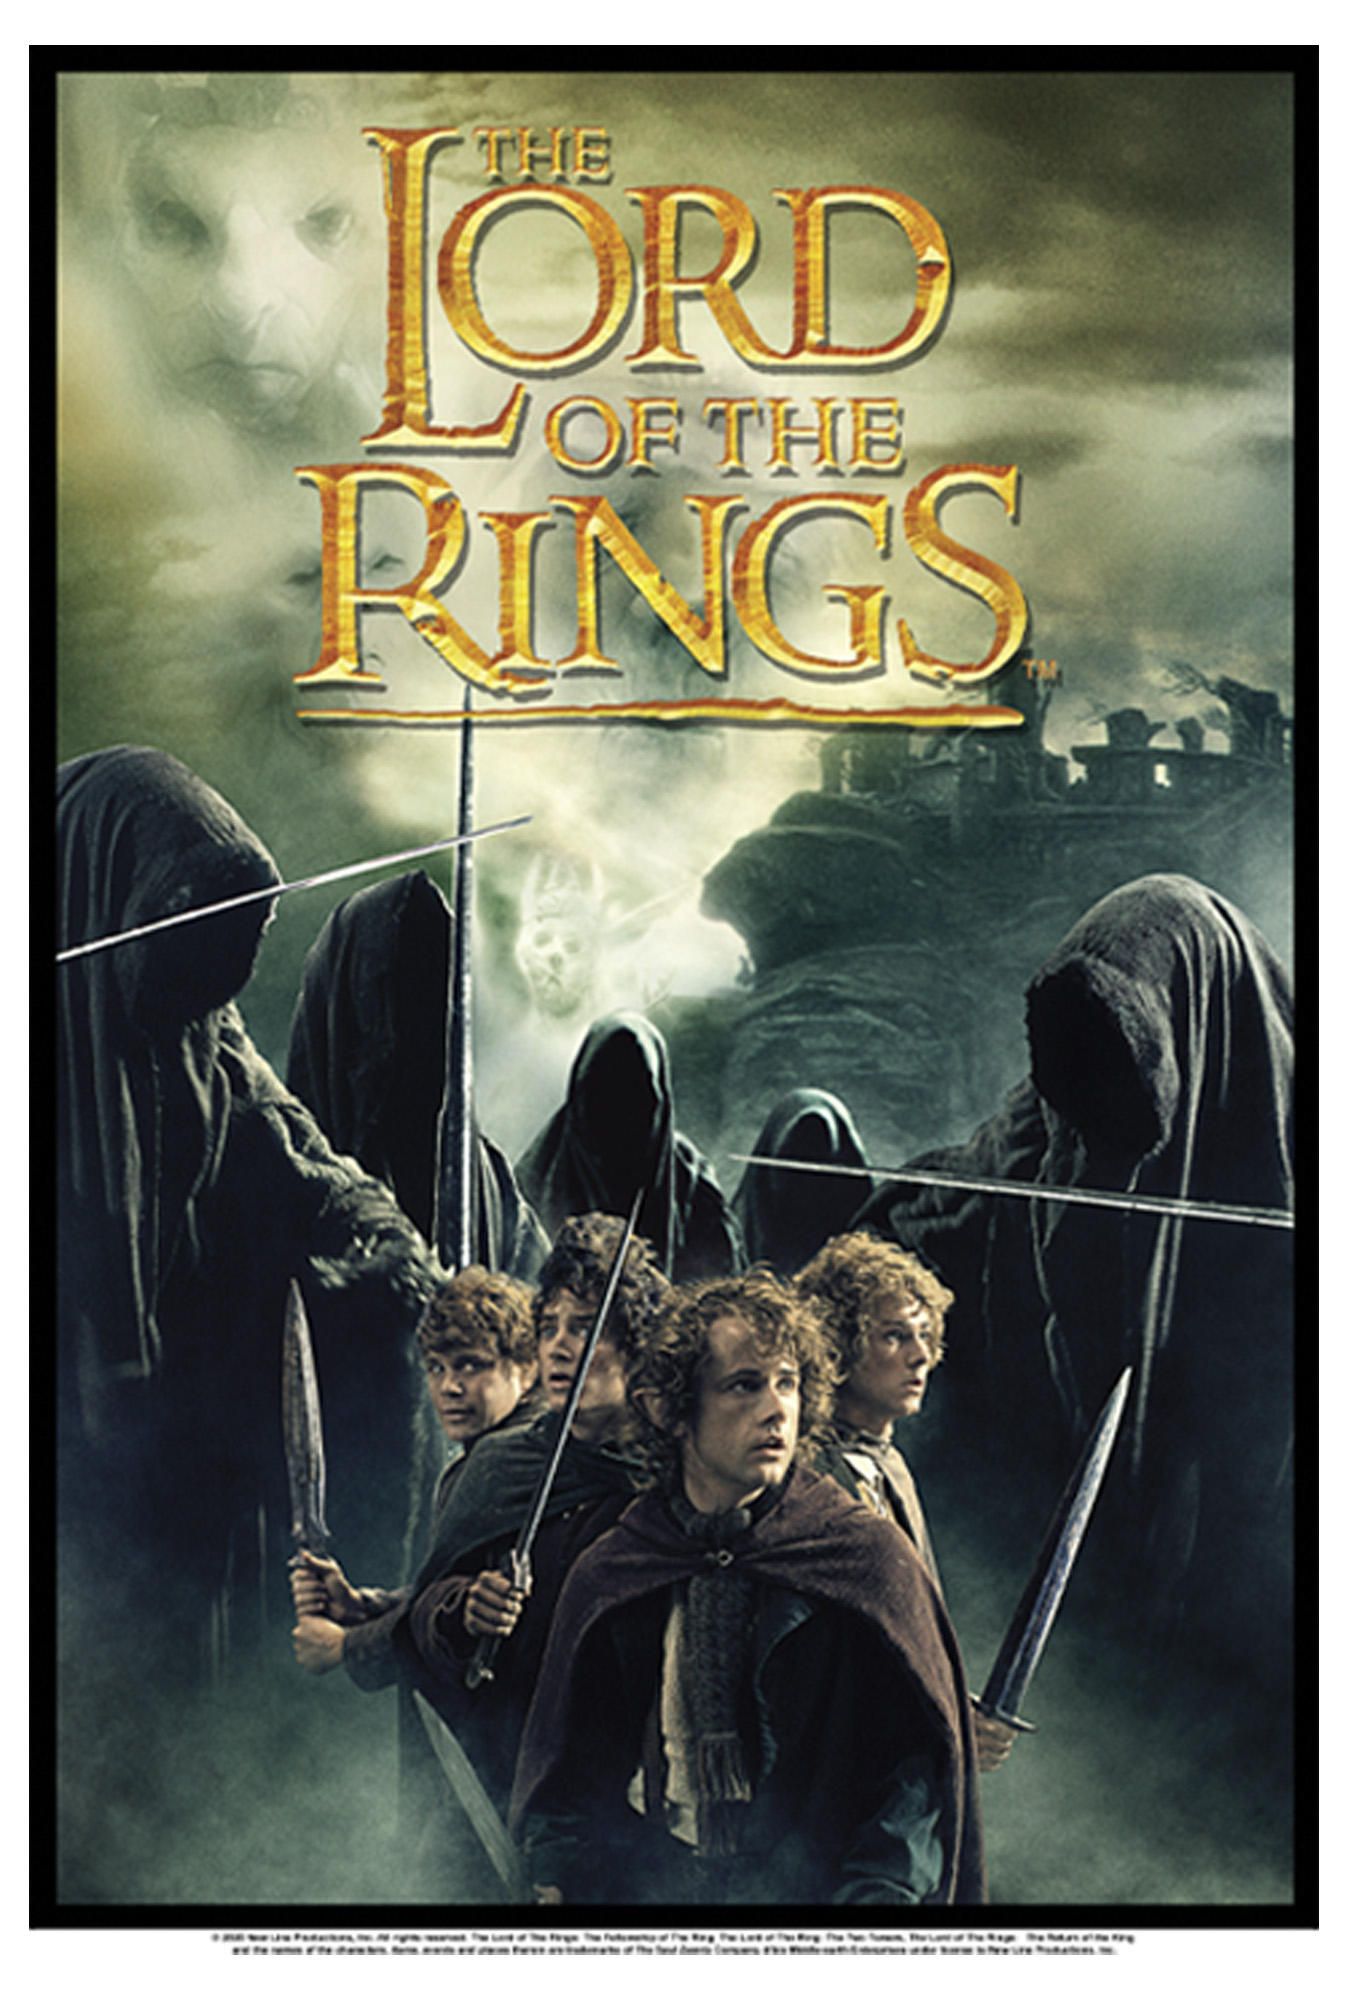 Lord of the Rings Junior's The Lord of the Rings Fellowship of the Ring Four Hobbits Movie Poster  Graphic T-Shirt